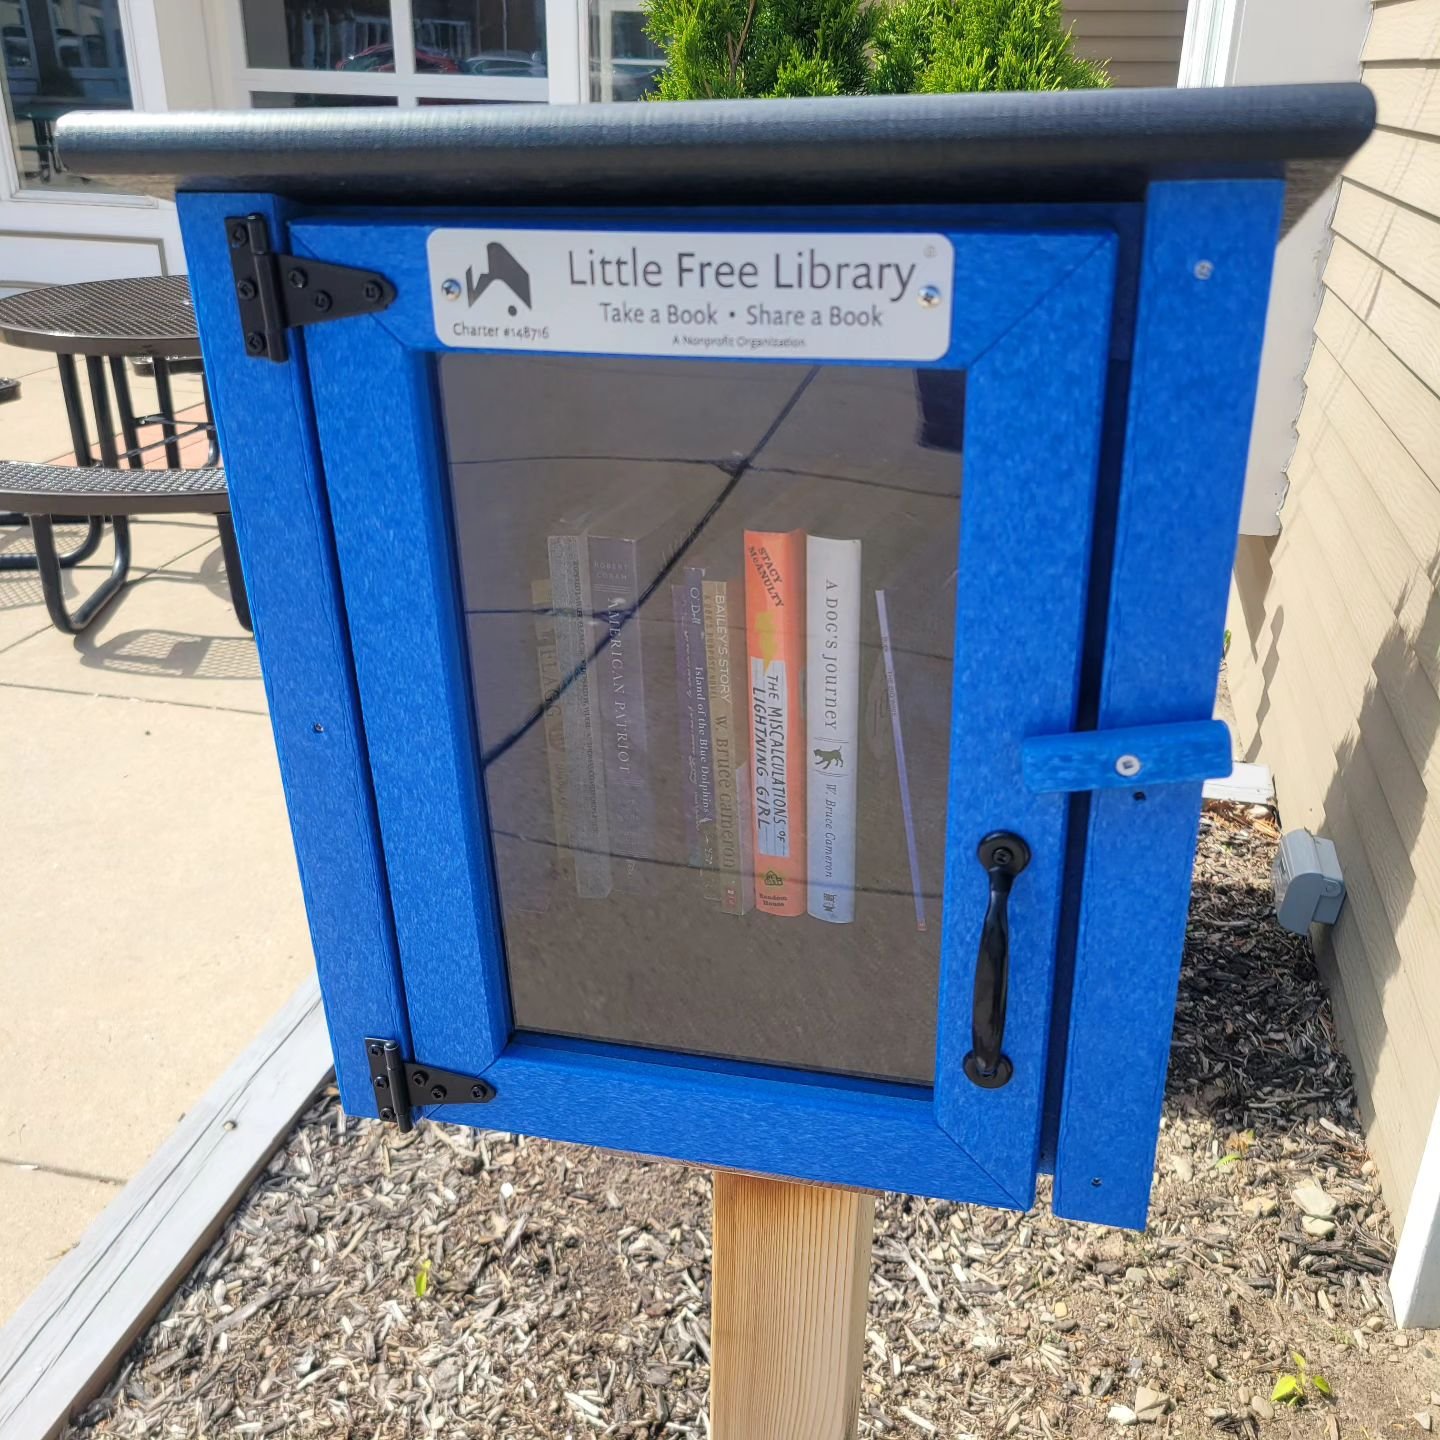 Help! Our Little Free Library only has a handful of books! We're in need of gently used adult and children's books to share with the community.